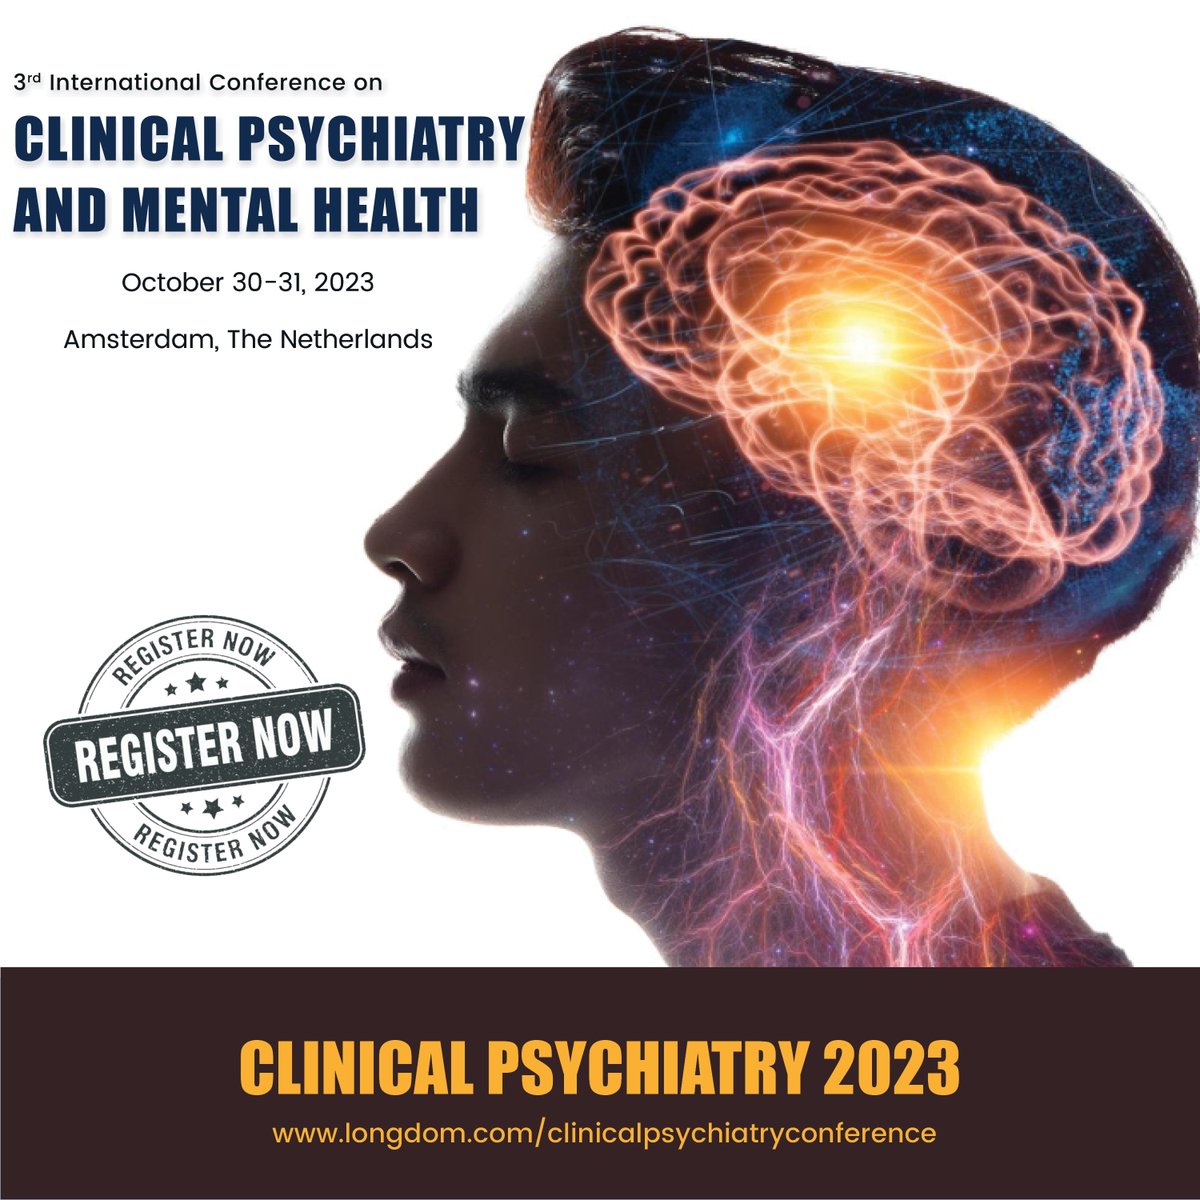 ⏳The second phase of early bird registration is closing on July 20th, 2023. ⚡️ This is your final chance to secure your spot and save big! Abstract Submission link: longdom.com/clinicalpsychi… Registration link: longdom.com/clinicalpsychi…